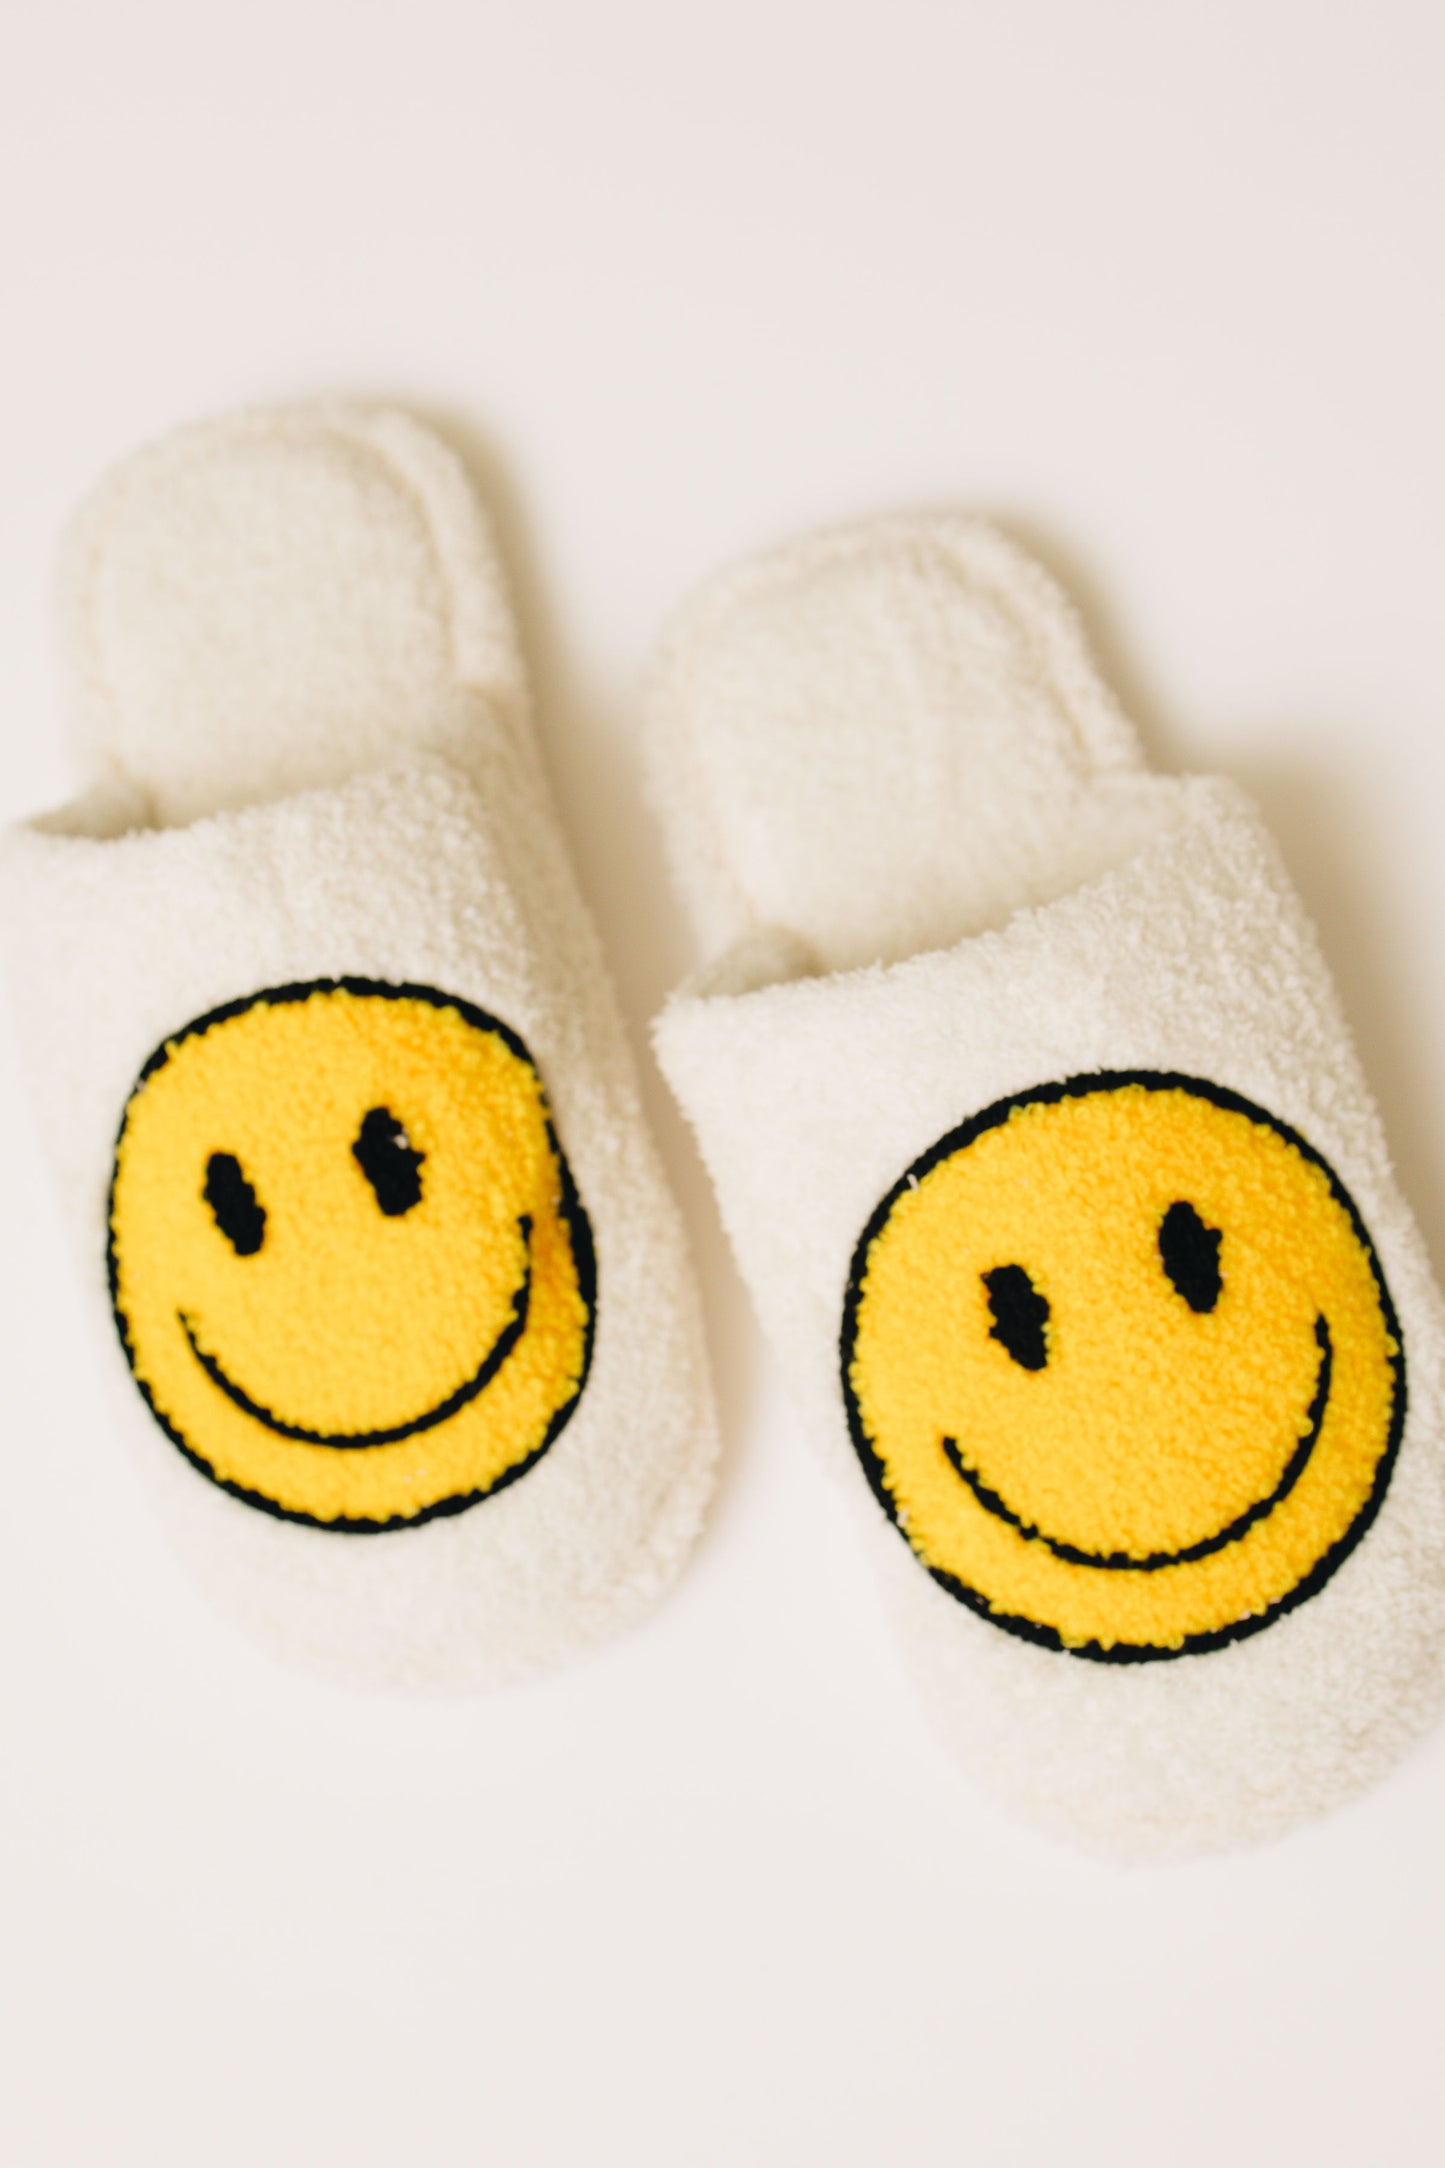 Smiley Face Slippers - Women's Fuzzy Slippers with Smiley Face - Emerald XO Ivy